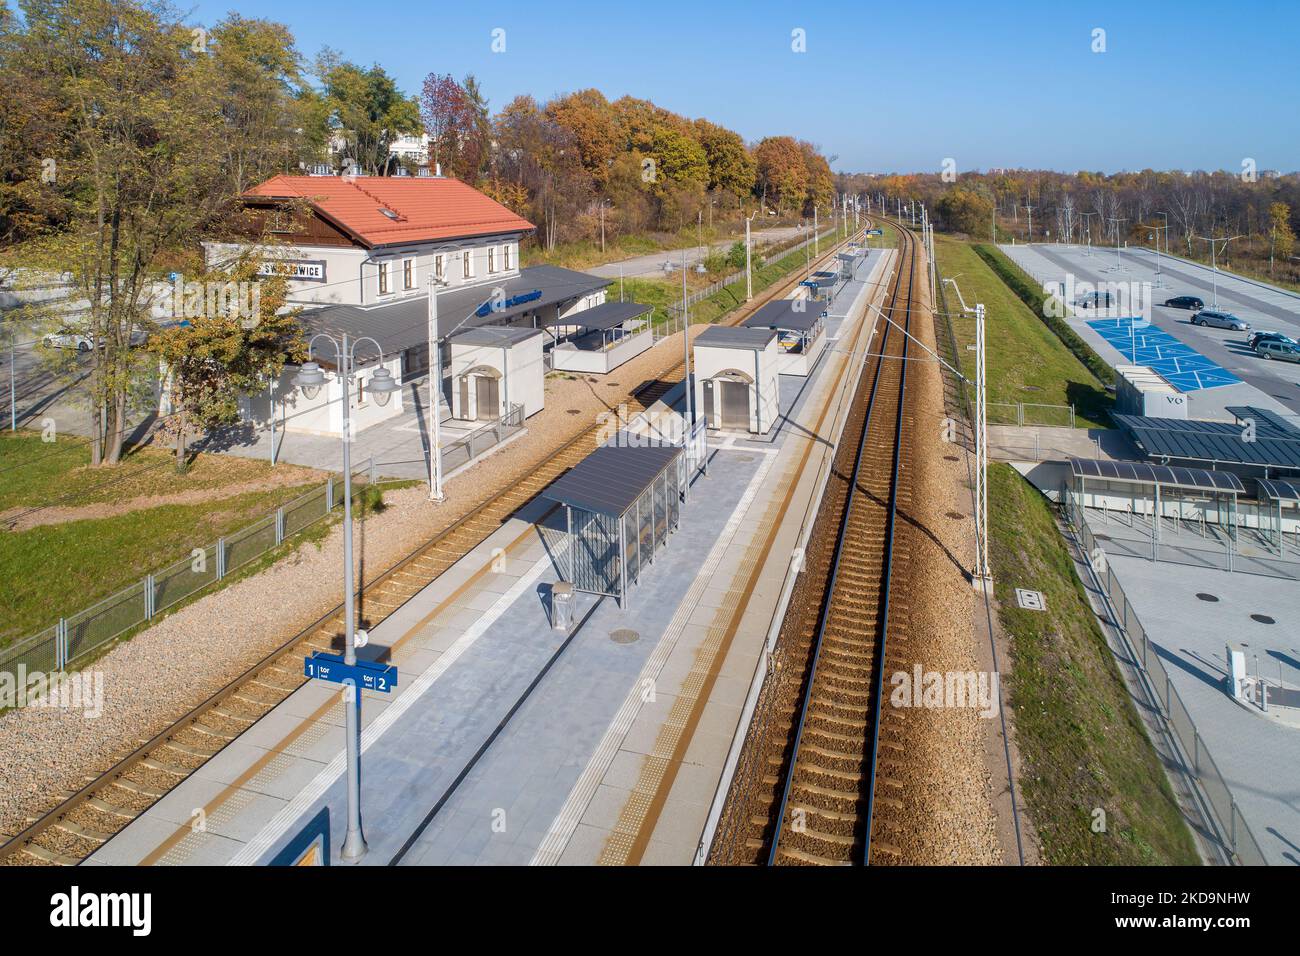 Newly modernized small railway station in Swoszowice district in Krakow, Poland, for fast city trains and regional passengers transportation. Big park Stock Photo